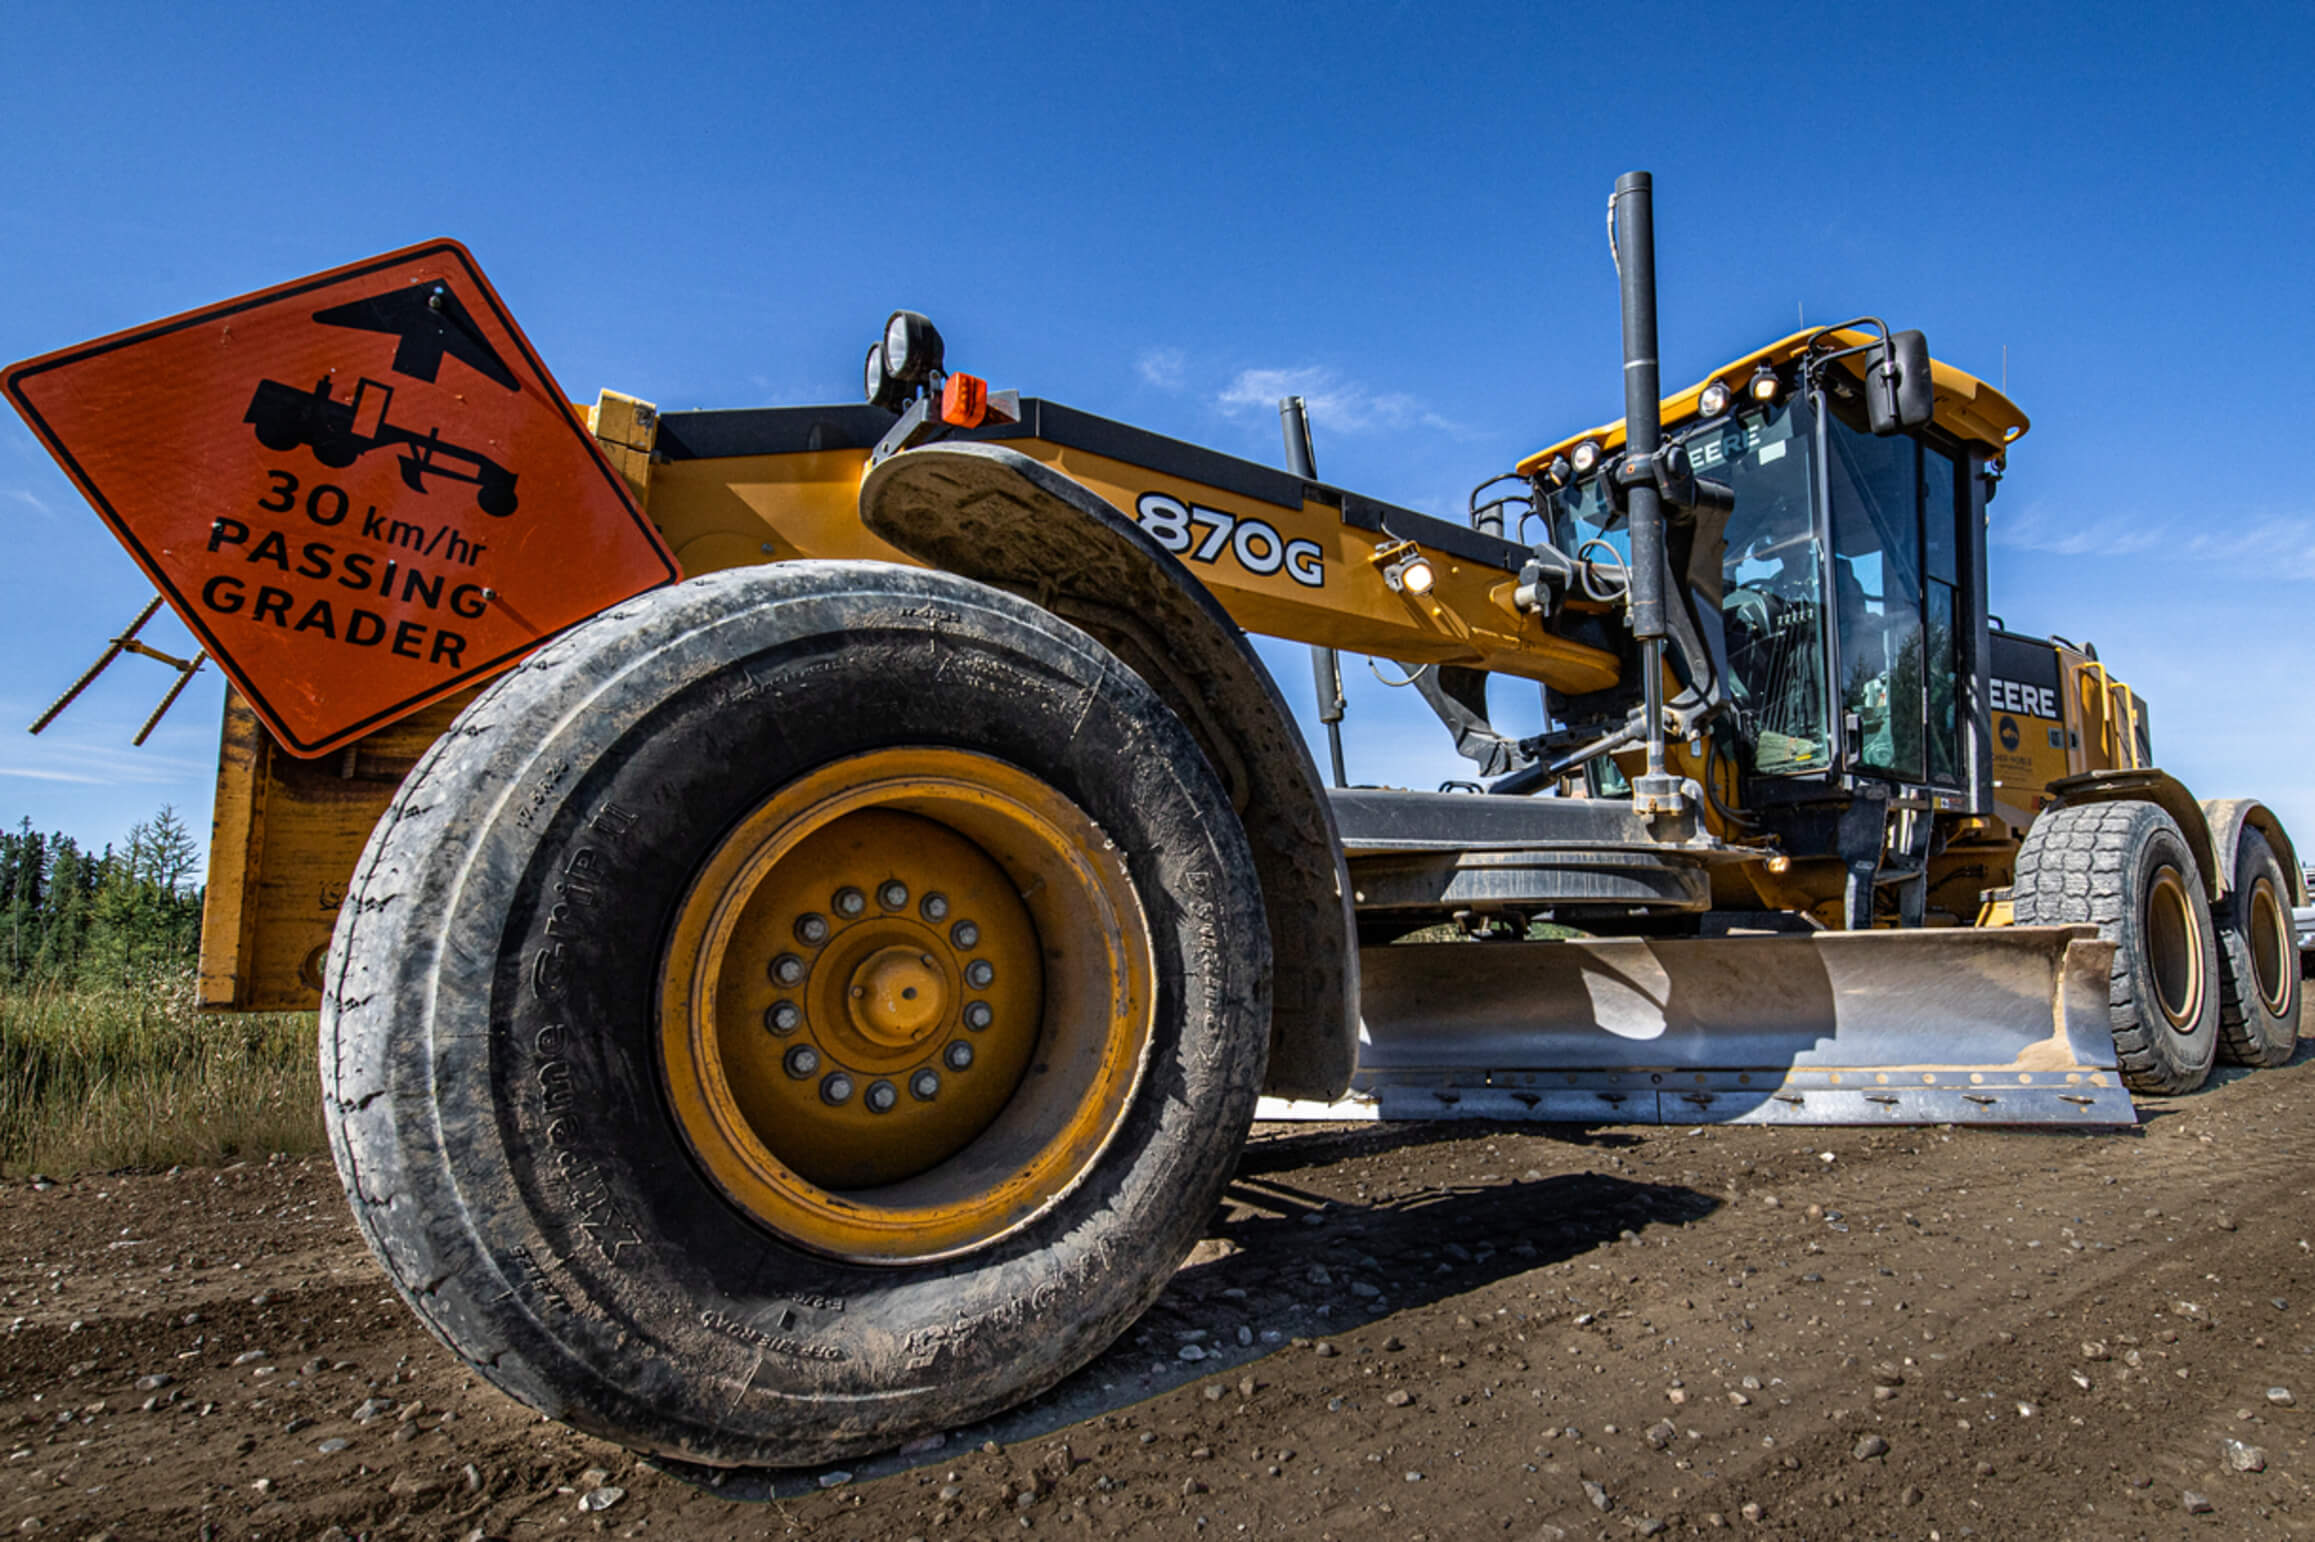 Noble Enterprises based out of Hinton, AB offers full service road maintenance including grading services